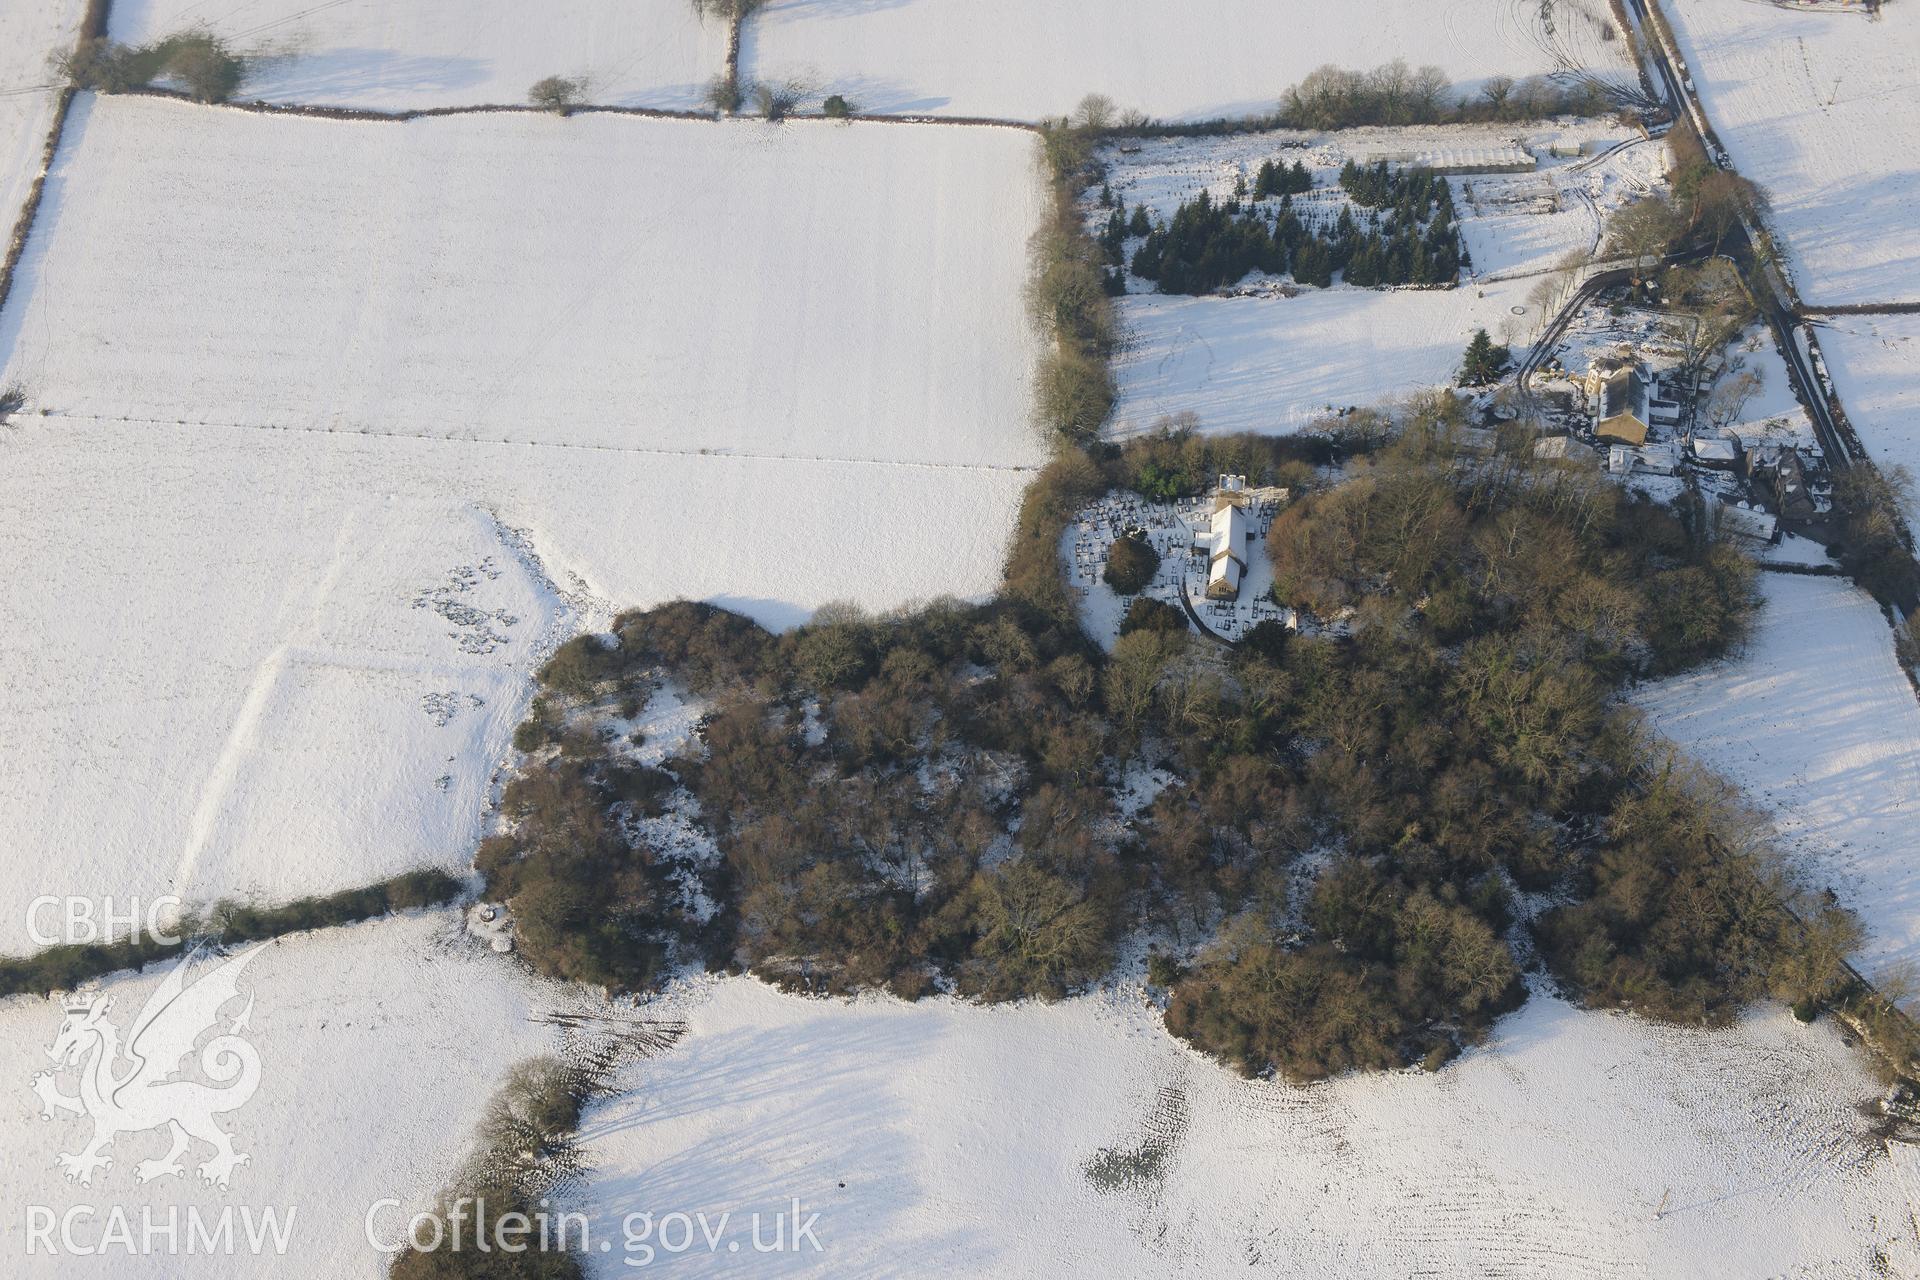 St. Illtyd's Church, Llanilid Castle ring-work and Gadlys moated site, Llanharan, east of Bridgend. Oblique aerial photograph taken during the Royal Commission?s programme of archaeological aerial reconnaissance by Toby Driver on 24th January 2013.